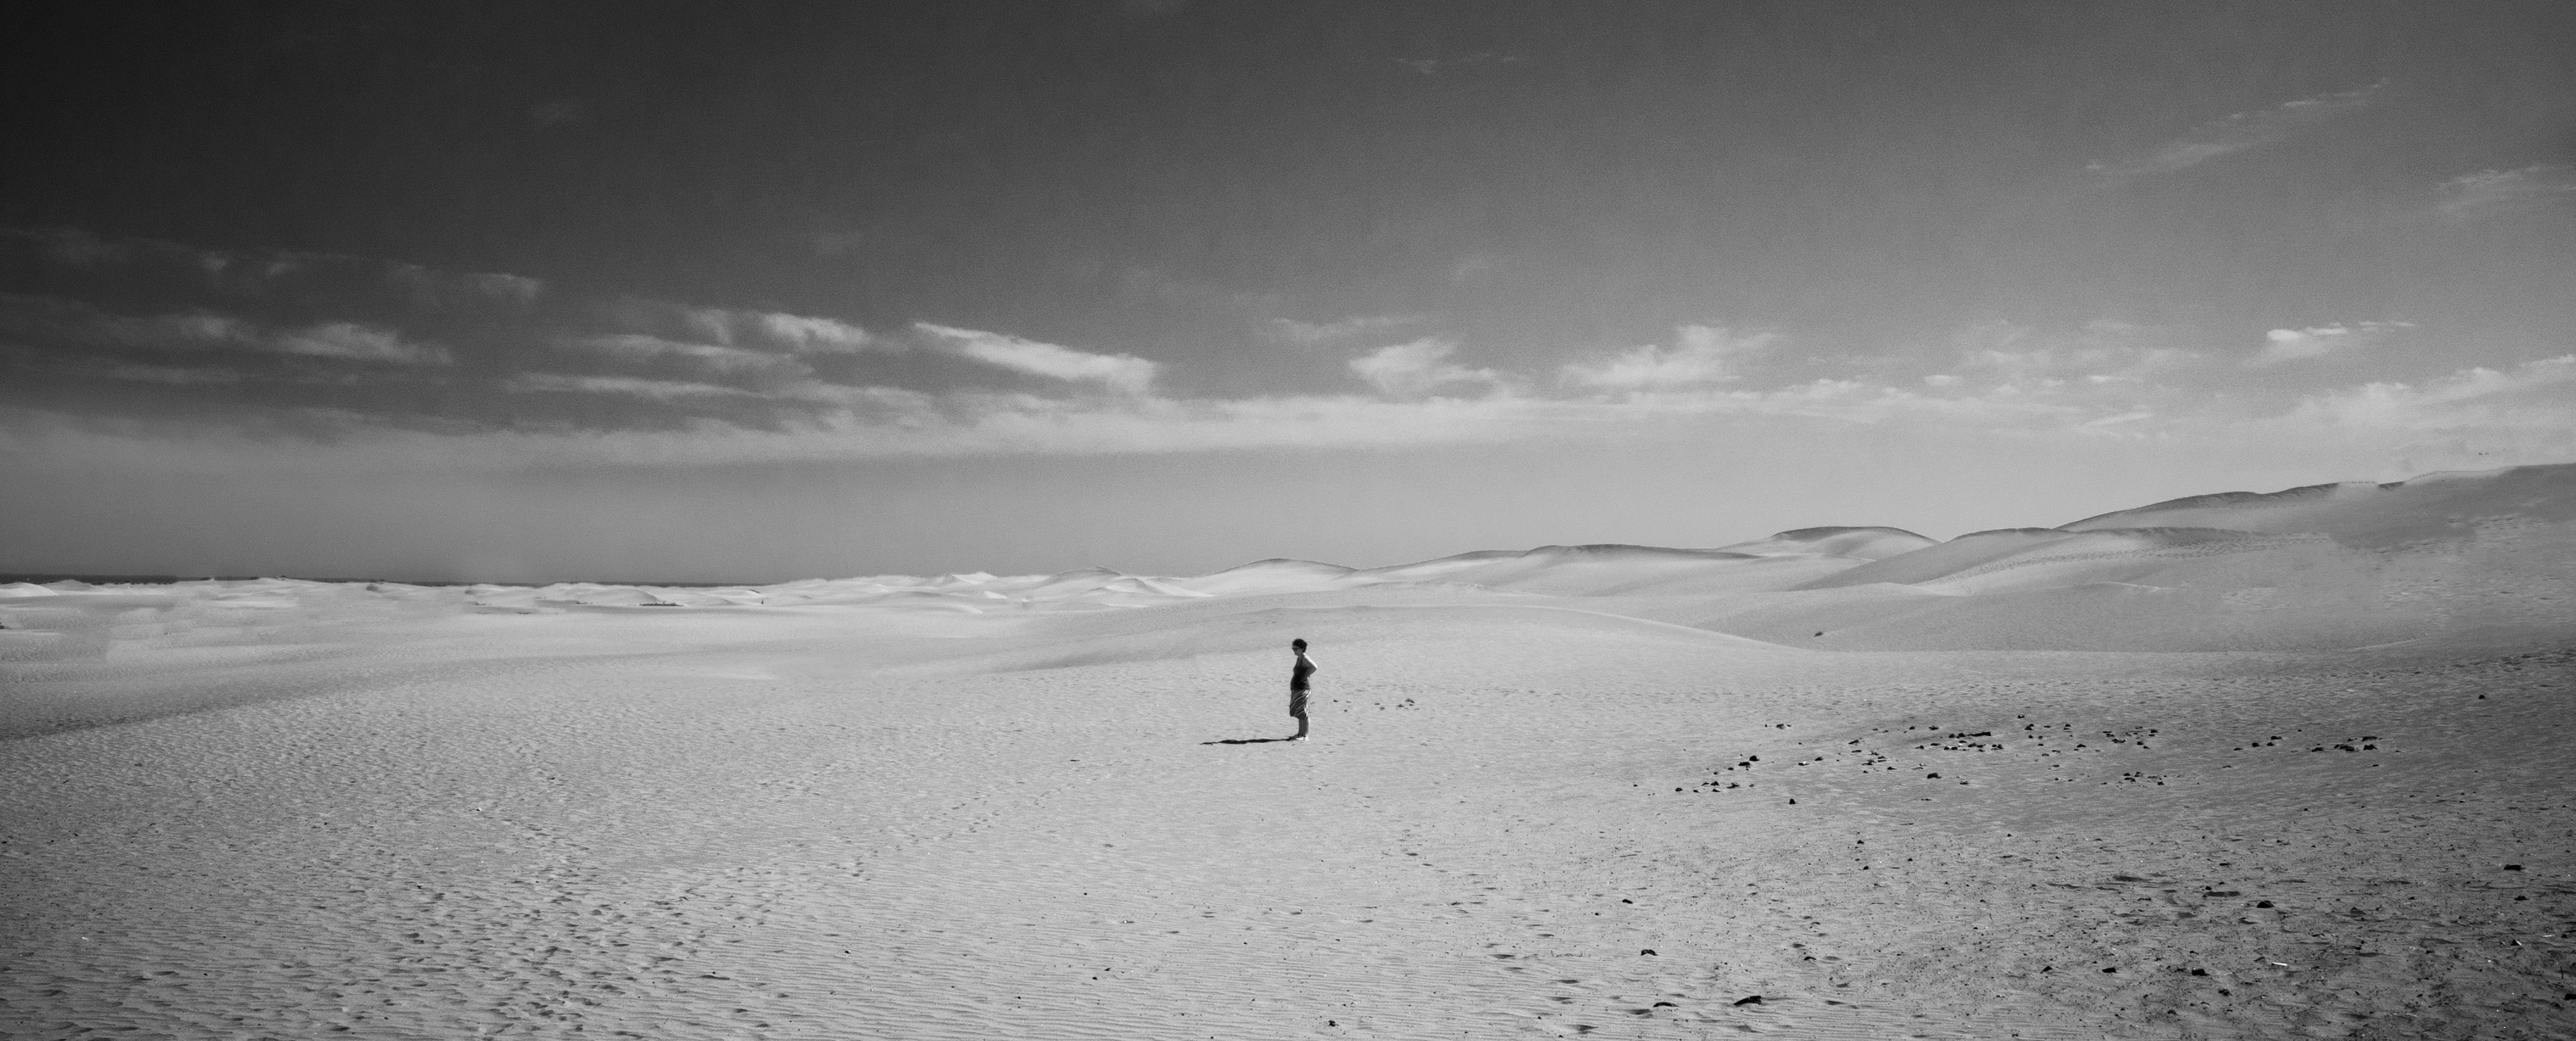 Example of negative space illustrated through a landscape image of a desert, with the focus of a man's silhouette in the center